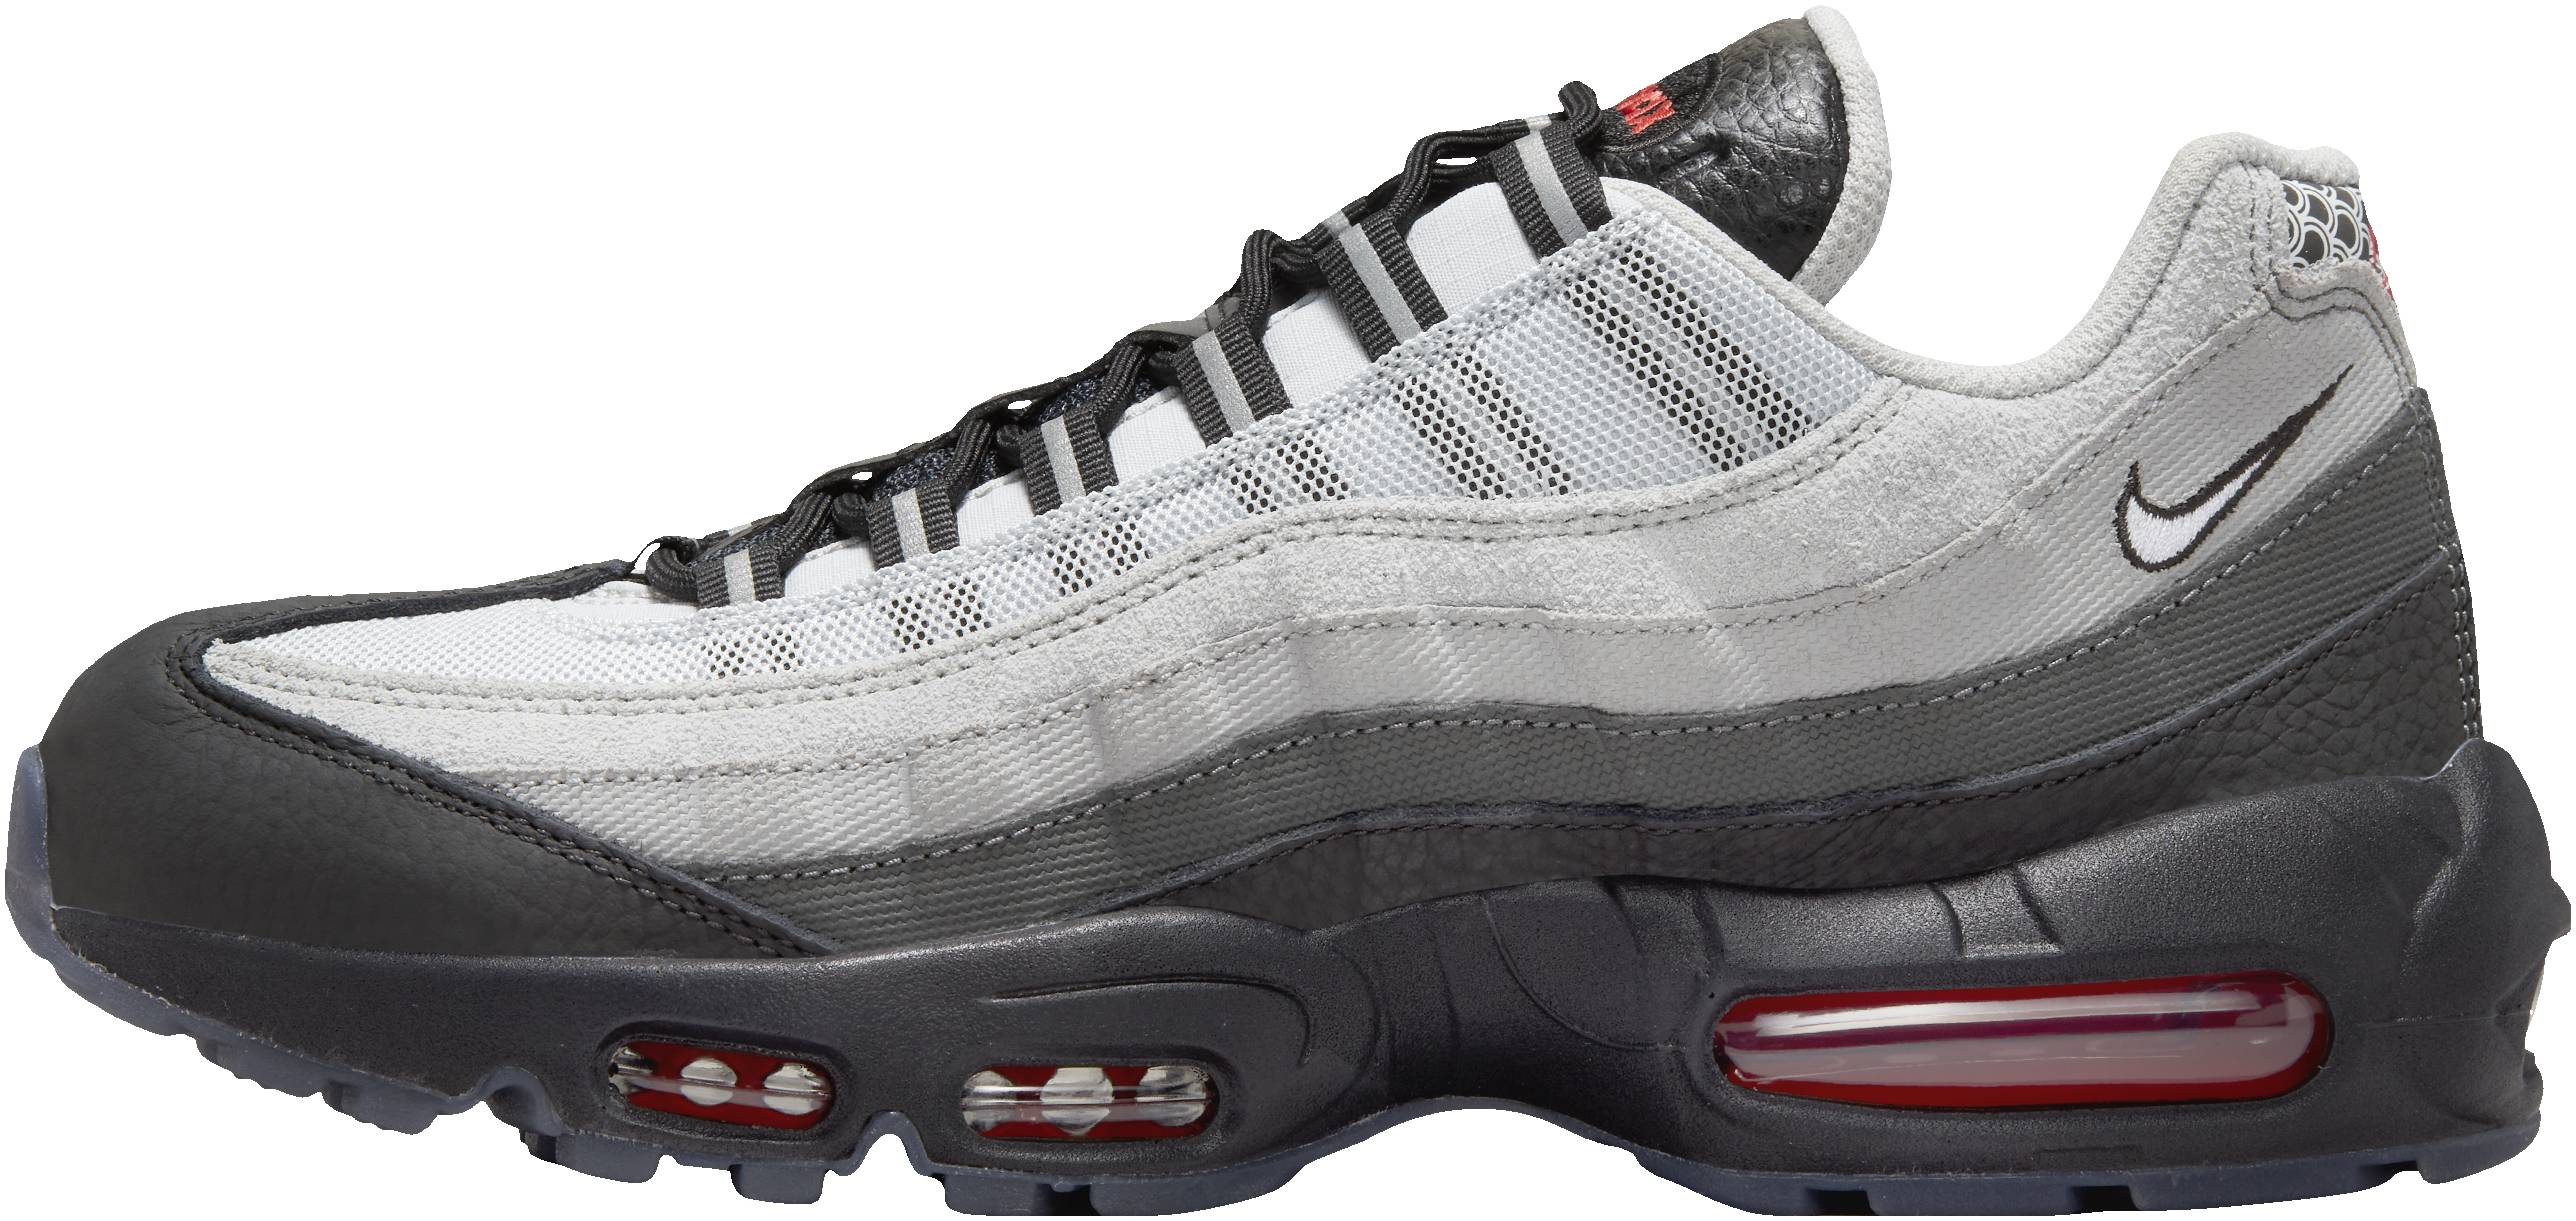 Portico Occur shaver Nike Air Max 95 Premium sneakers in 10+ colors (only $75) | RunRepeat